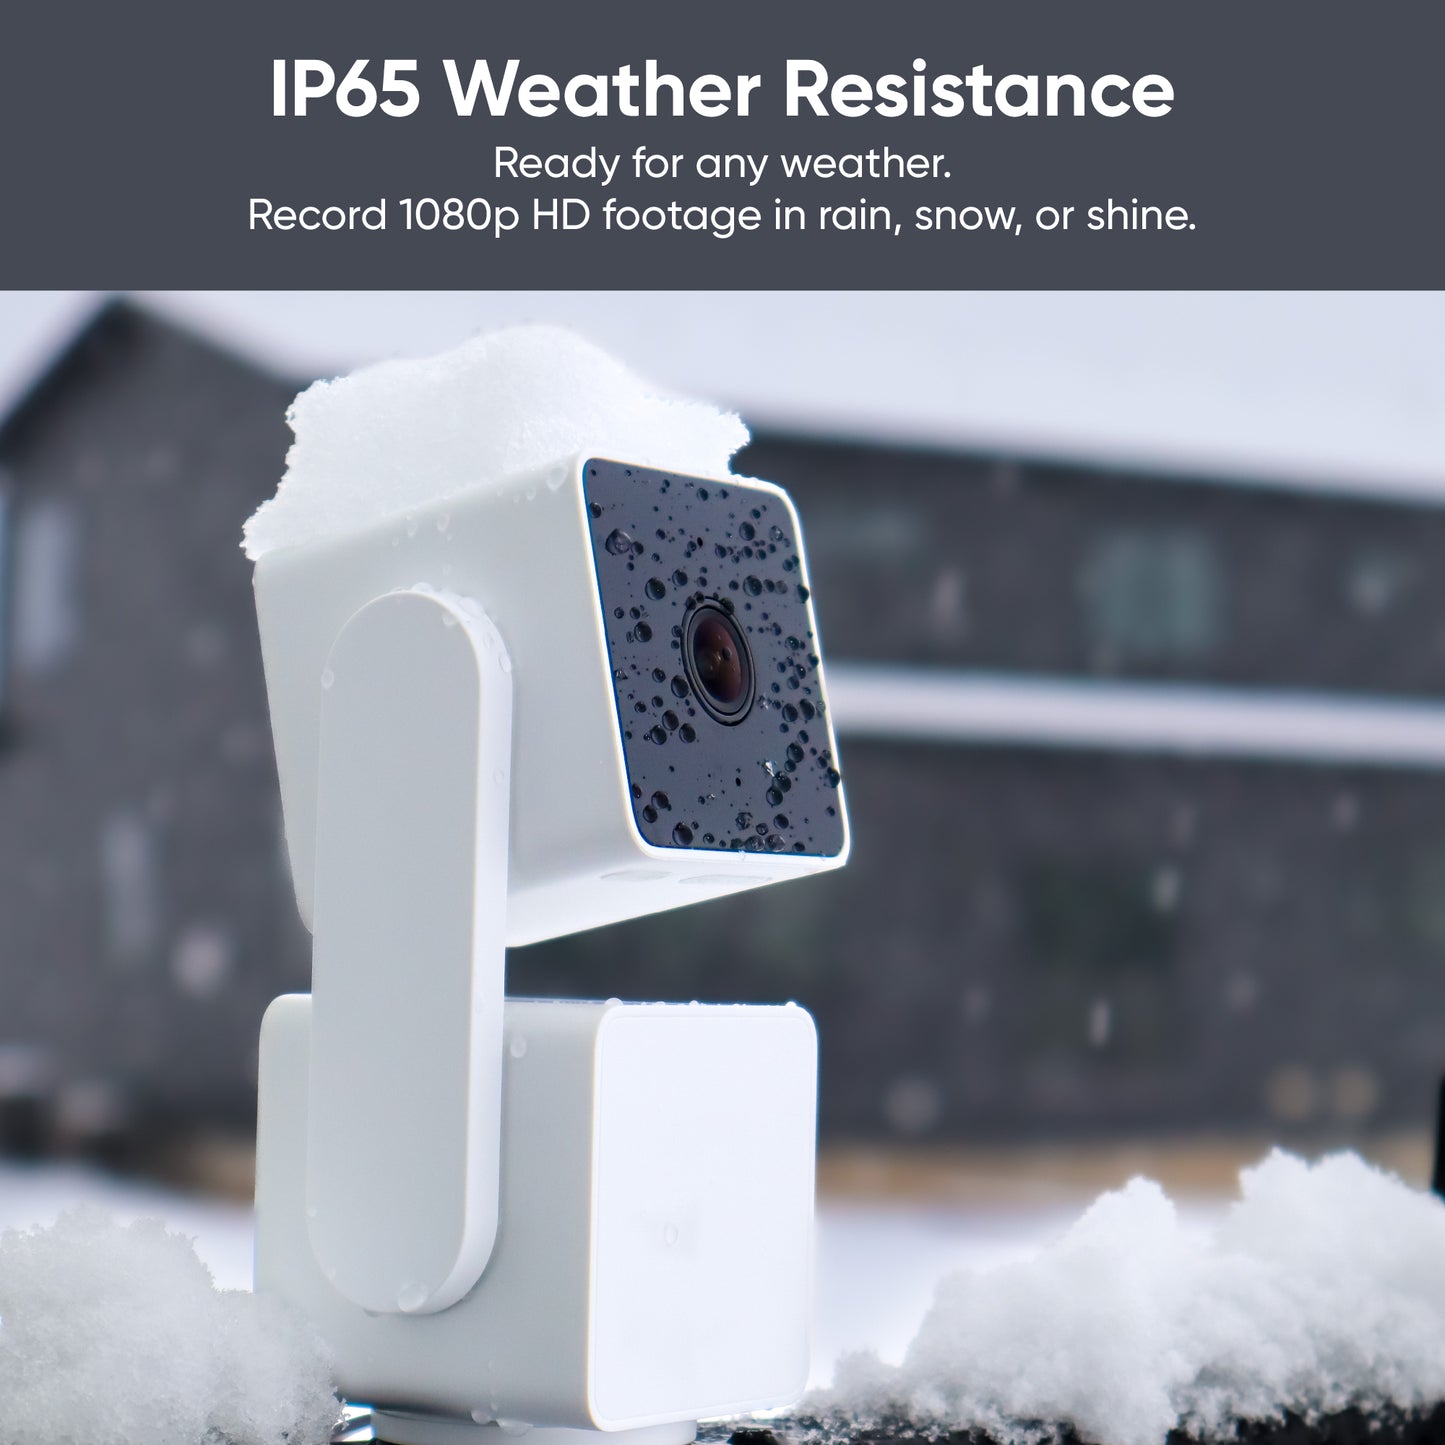 Text overlay "IP65 Weather Resistance.". Image shows a Wyze Cam Pan v3 outside with snow around and on top of it.